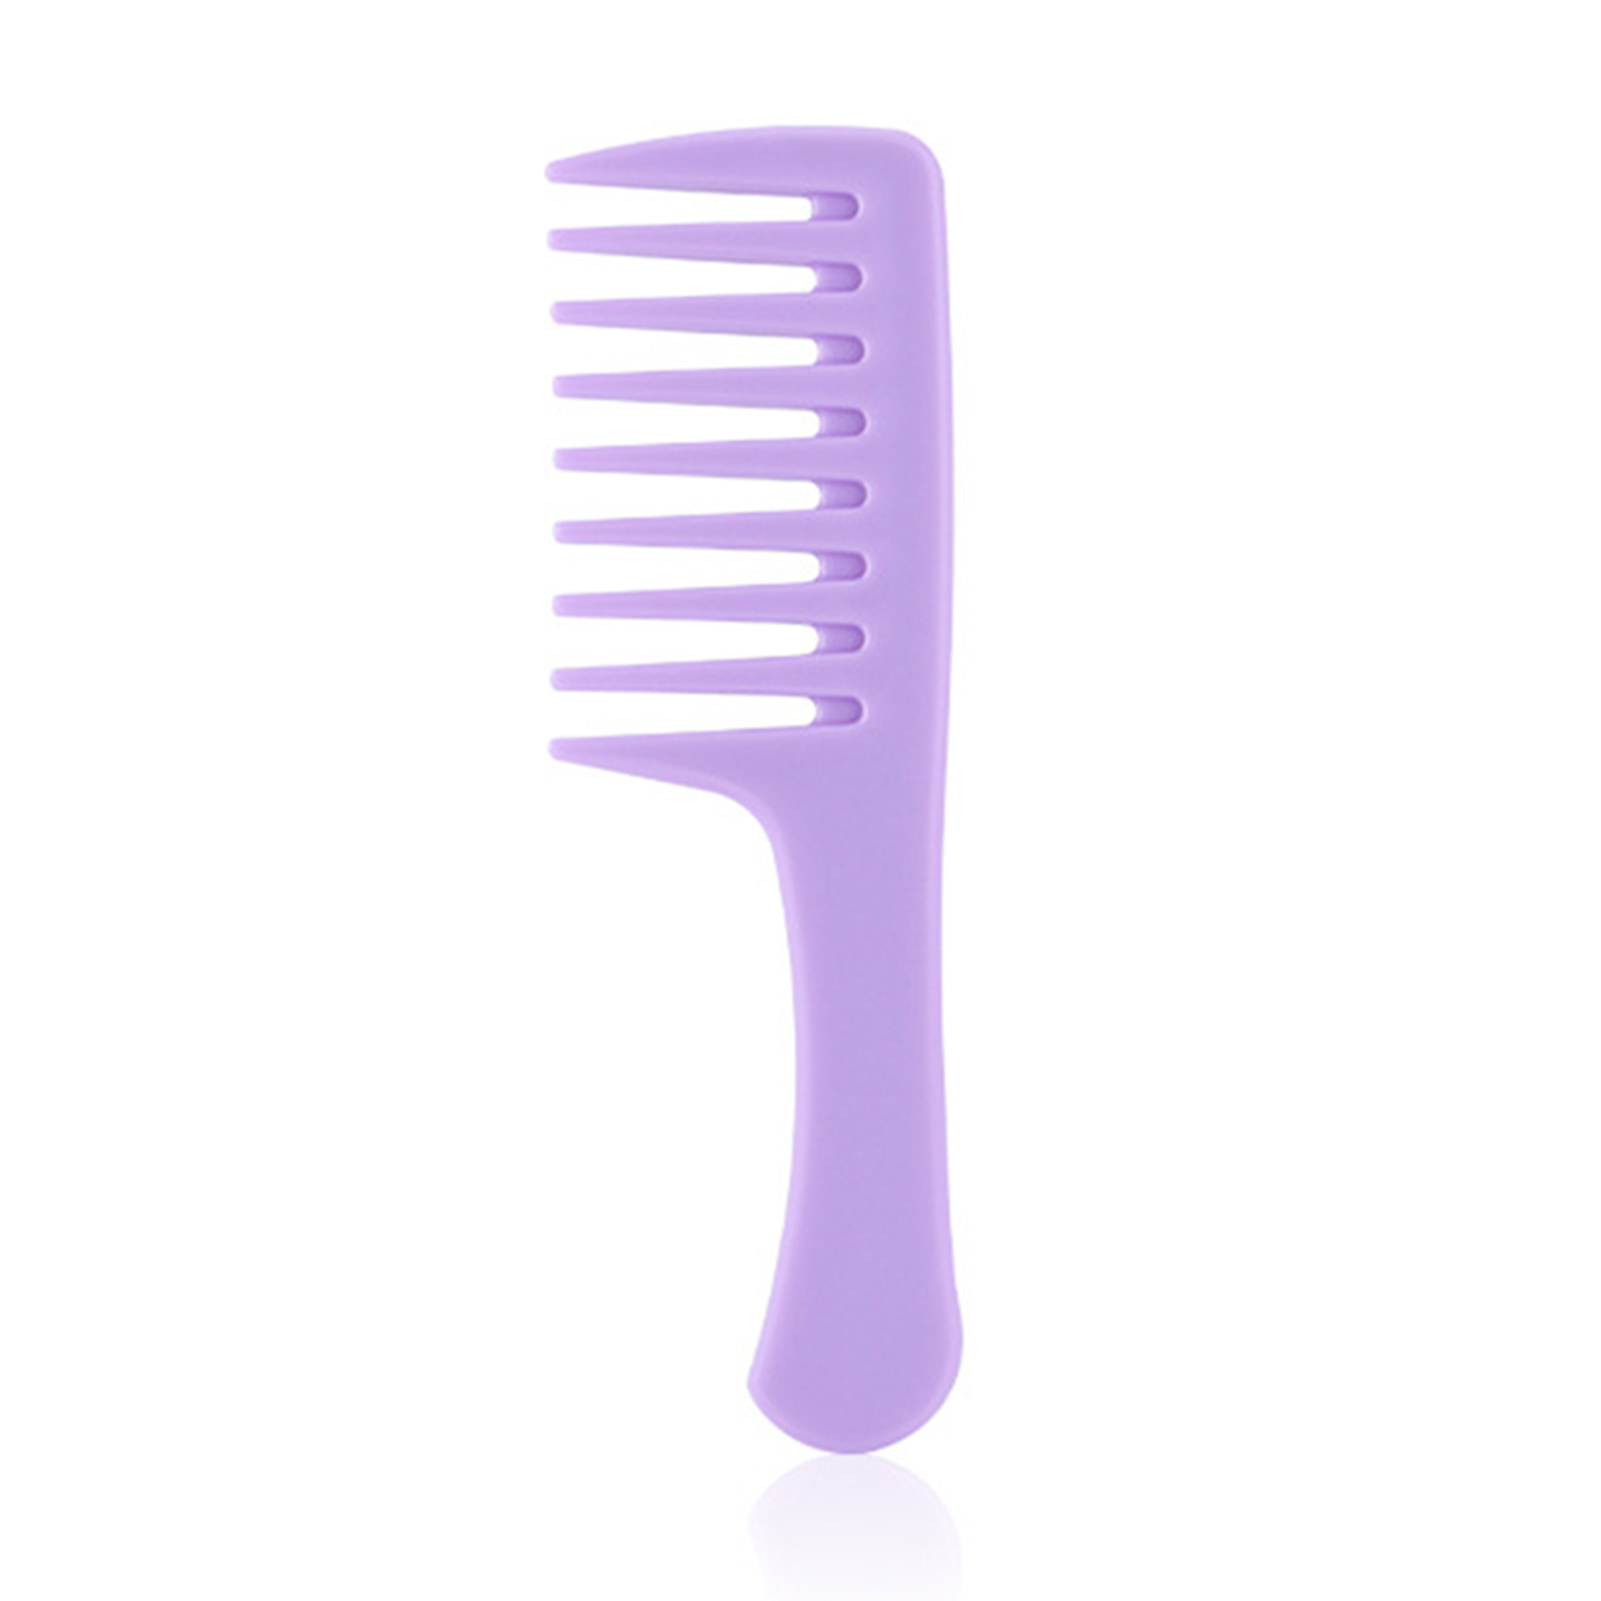 Smooth Hair Comb Plastic Household Candy Color Big Tooth Comb Purple Wide Tooth Comb Durable Detangling Hair Brush Professional Handgrip Comb for Curly Hair Long Hair Wet Hair New - image 1 of 2